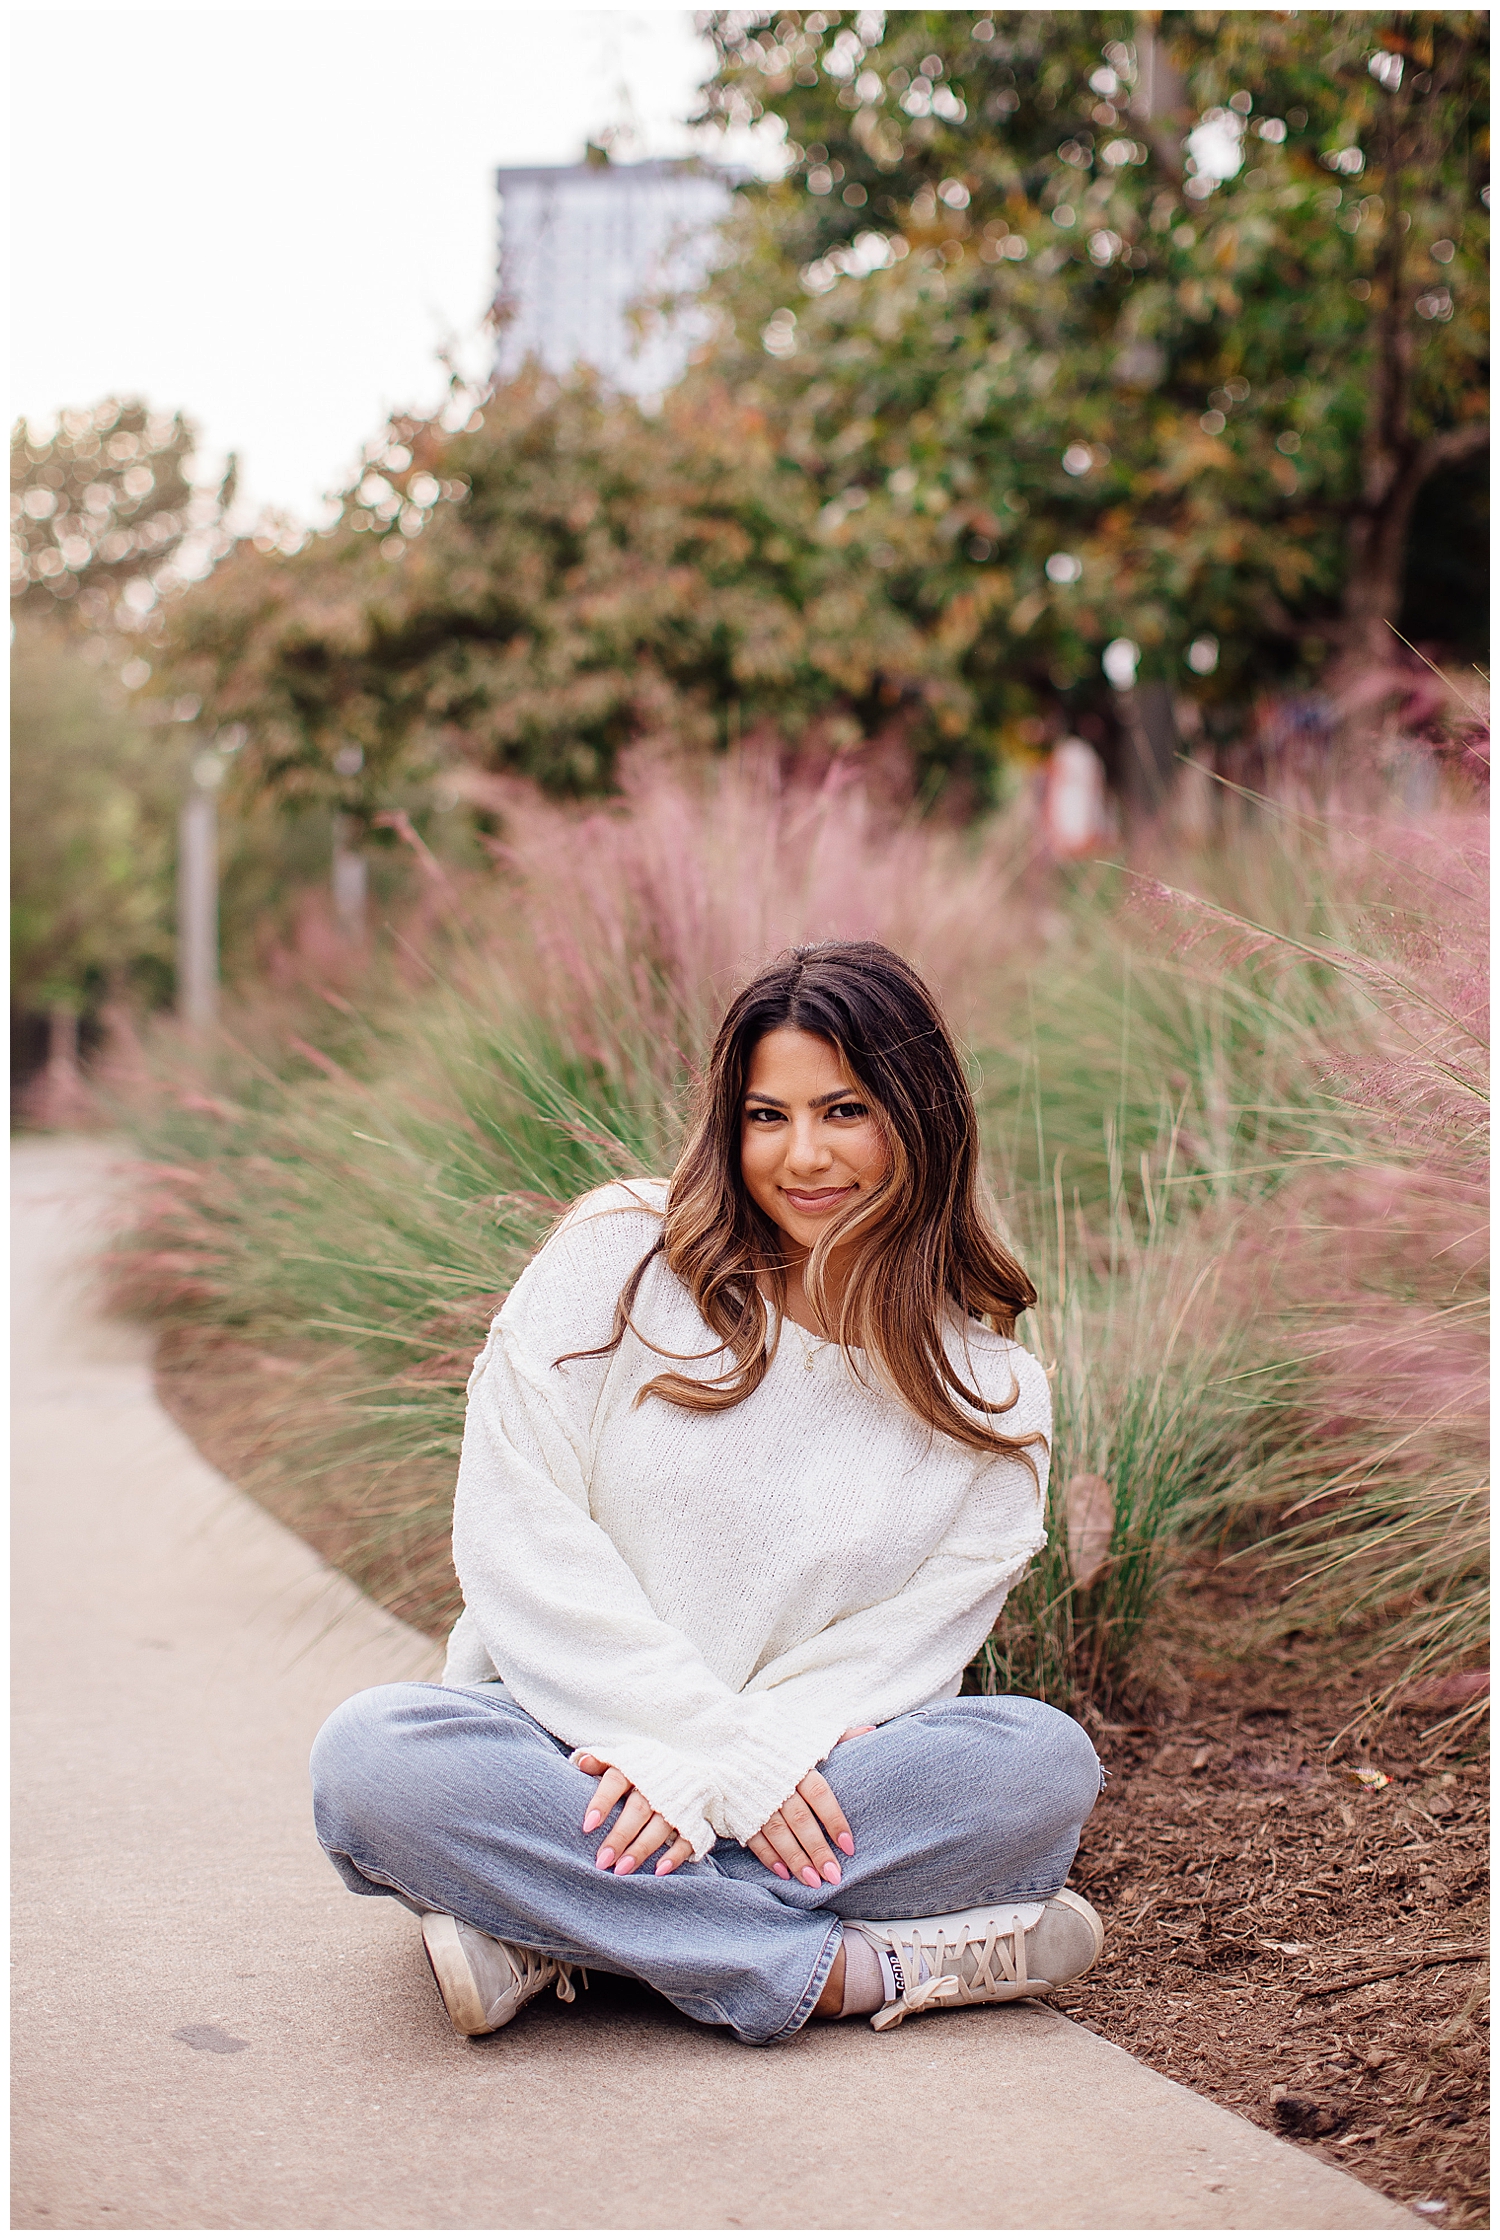 Houston senior photography sessions where girl is sitting on ground in jeans and white shirt smiling